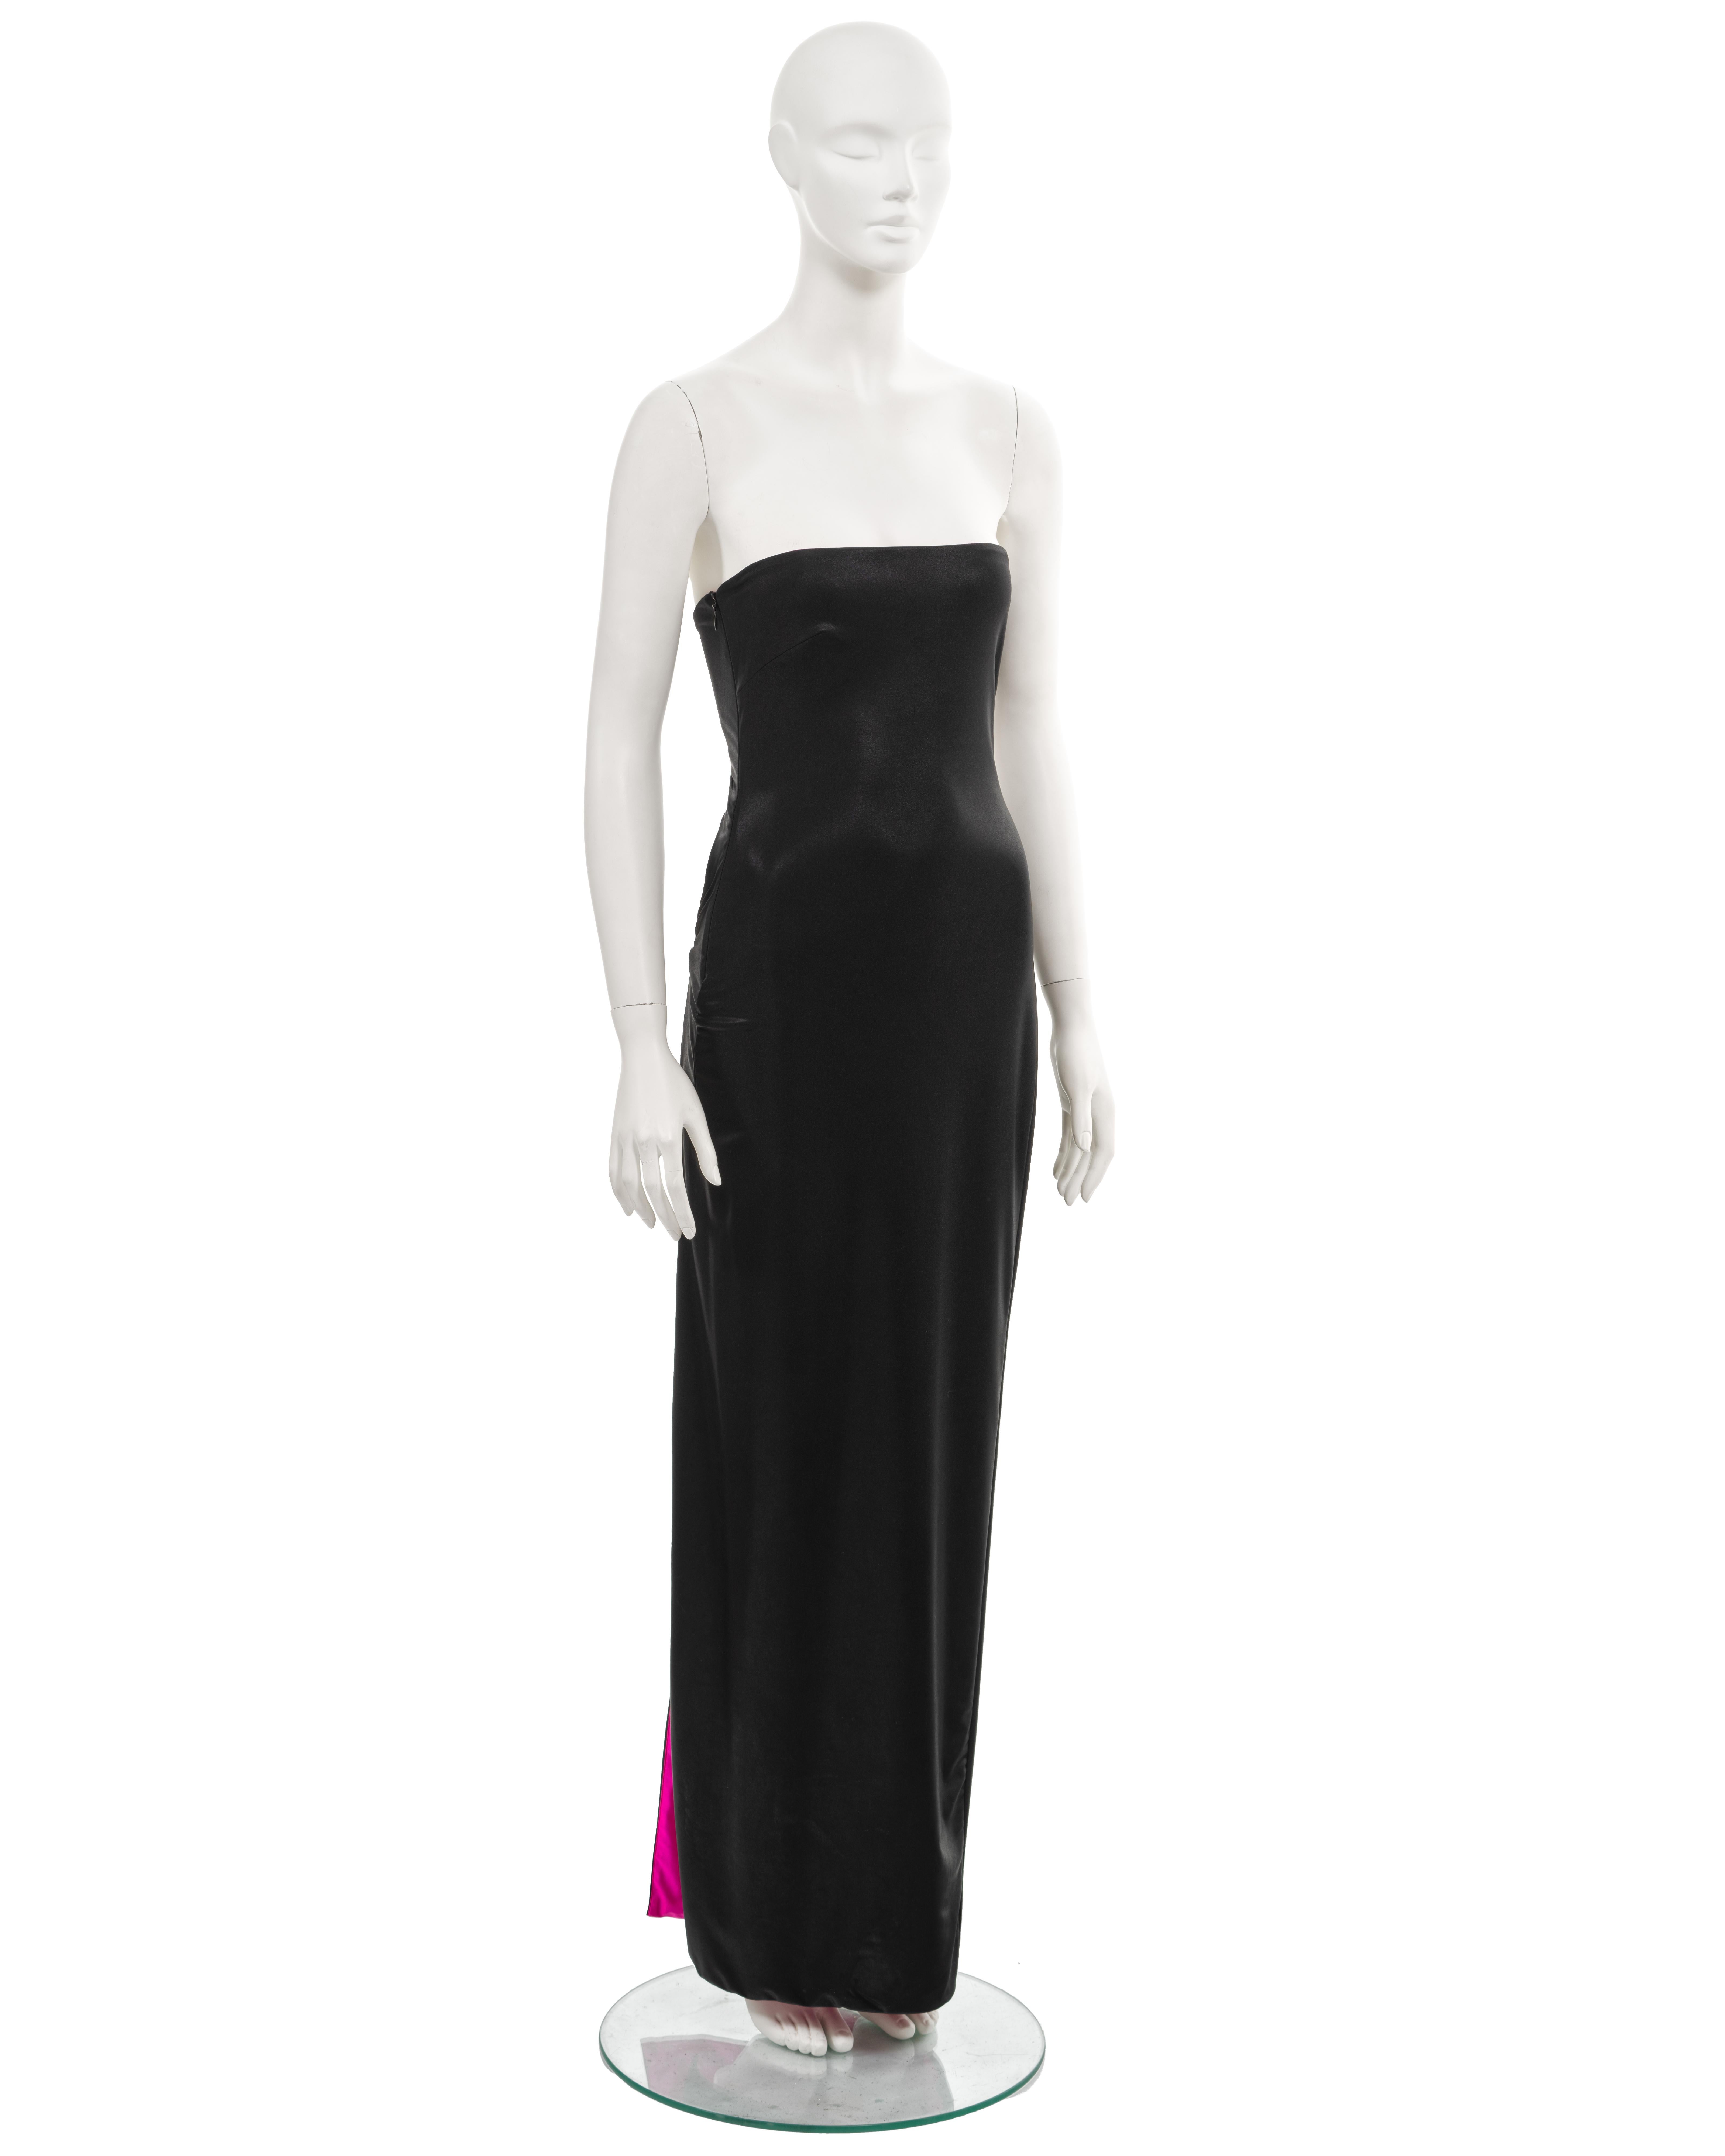 Gianni Versace black wet-look strapless evening dress with cut outs, ss 1998 For Sale 4